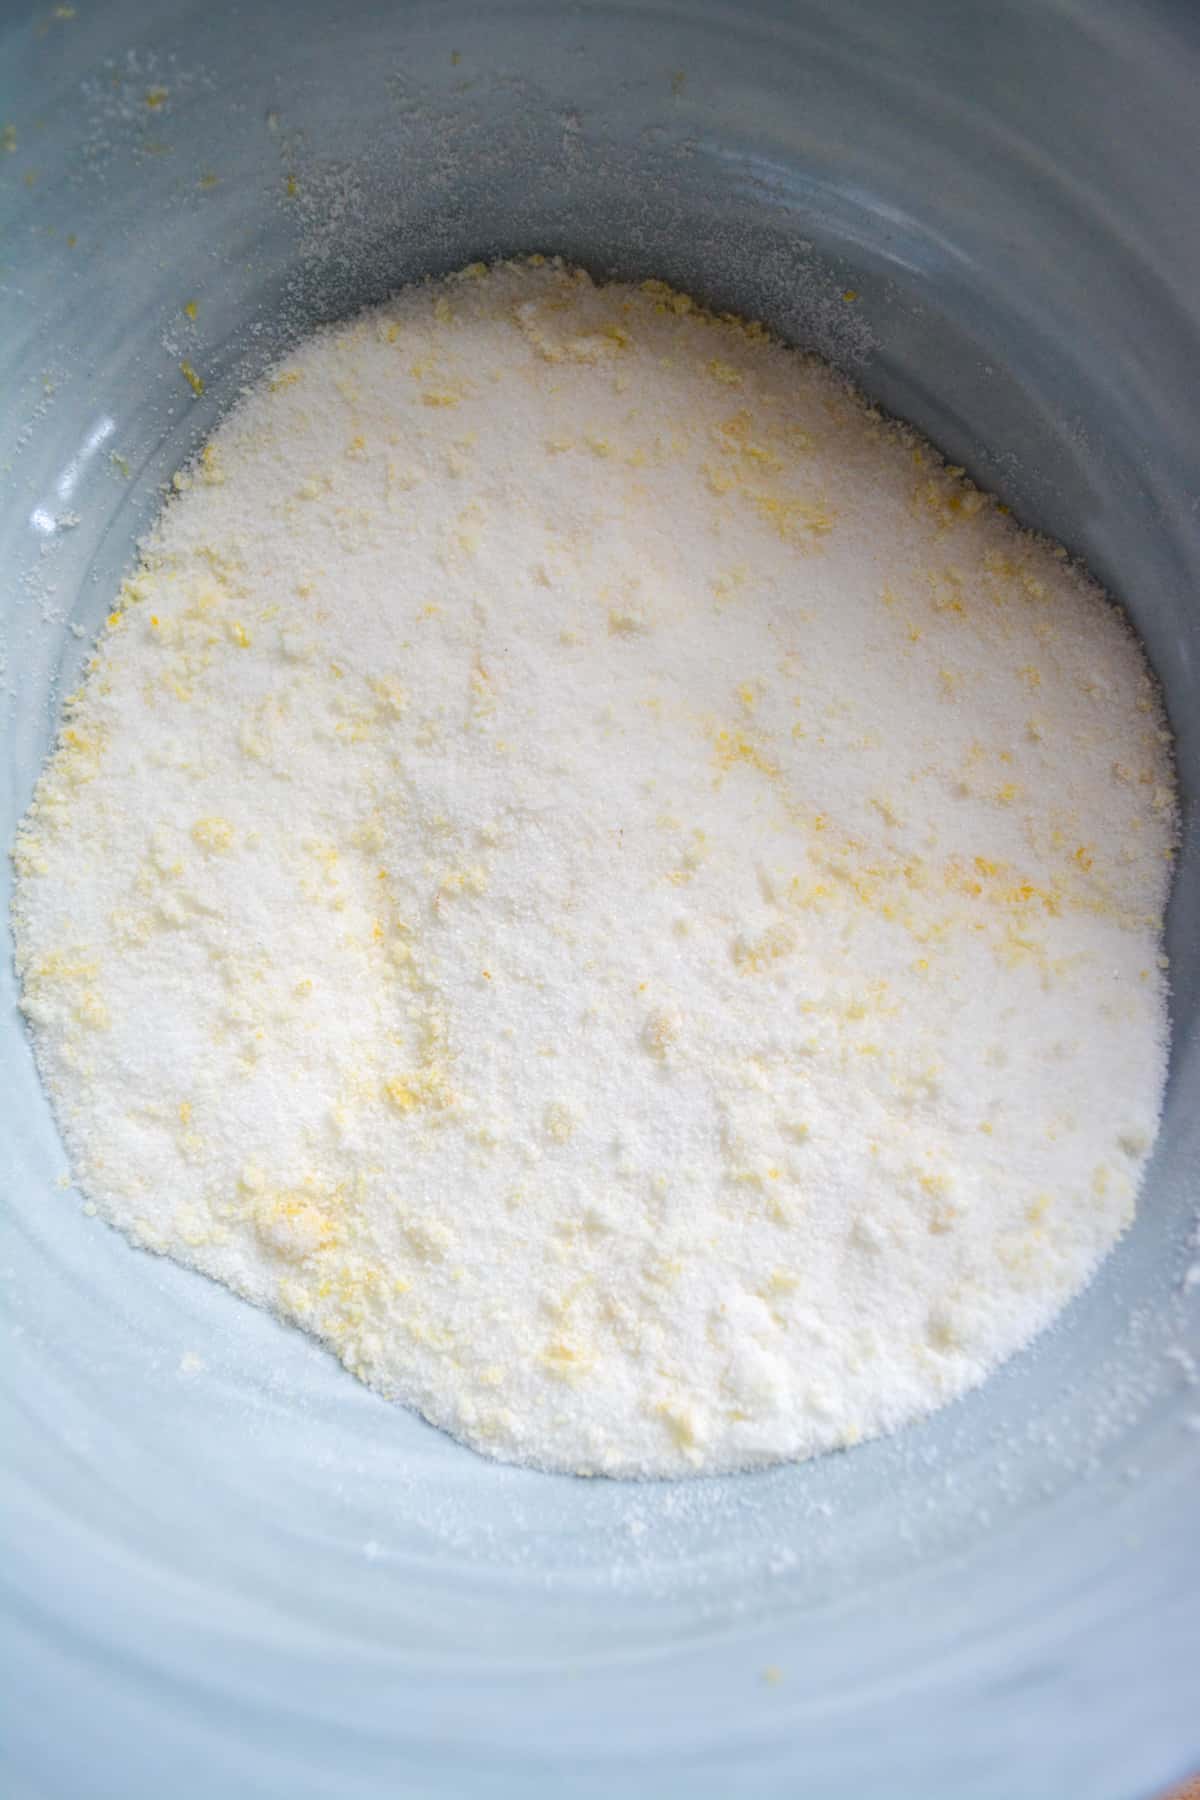 Lemon zest rubbed into the granulated sugar in a mixing bowl.